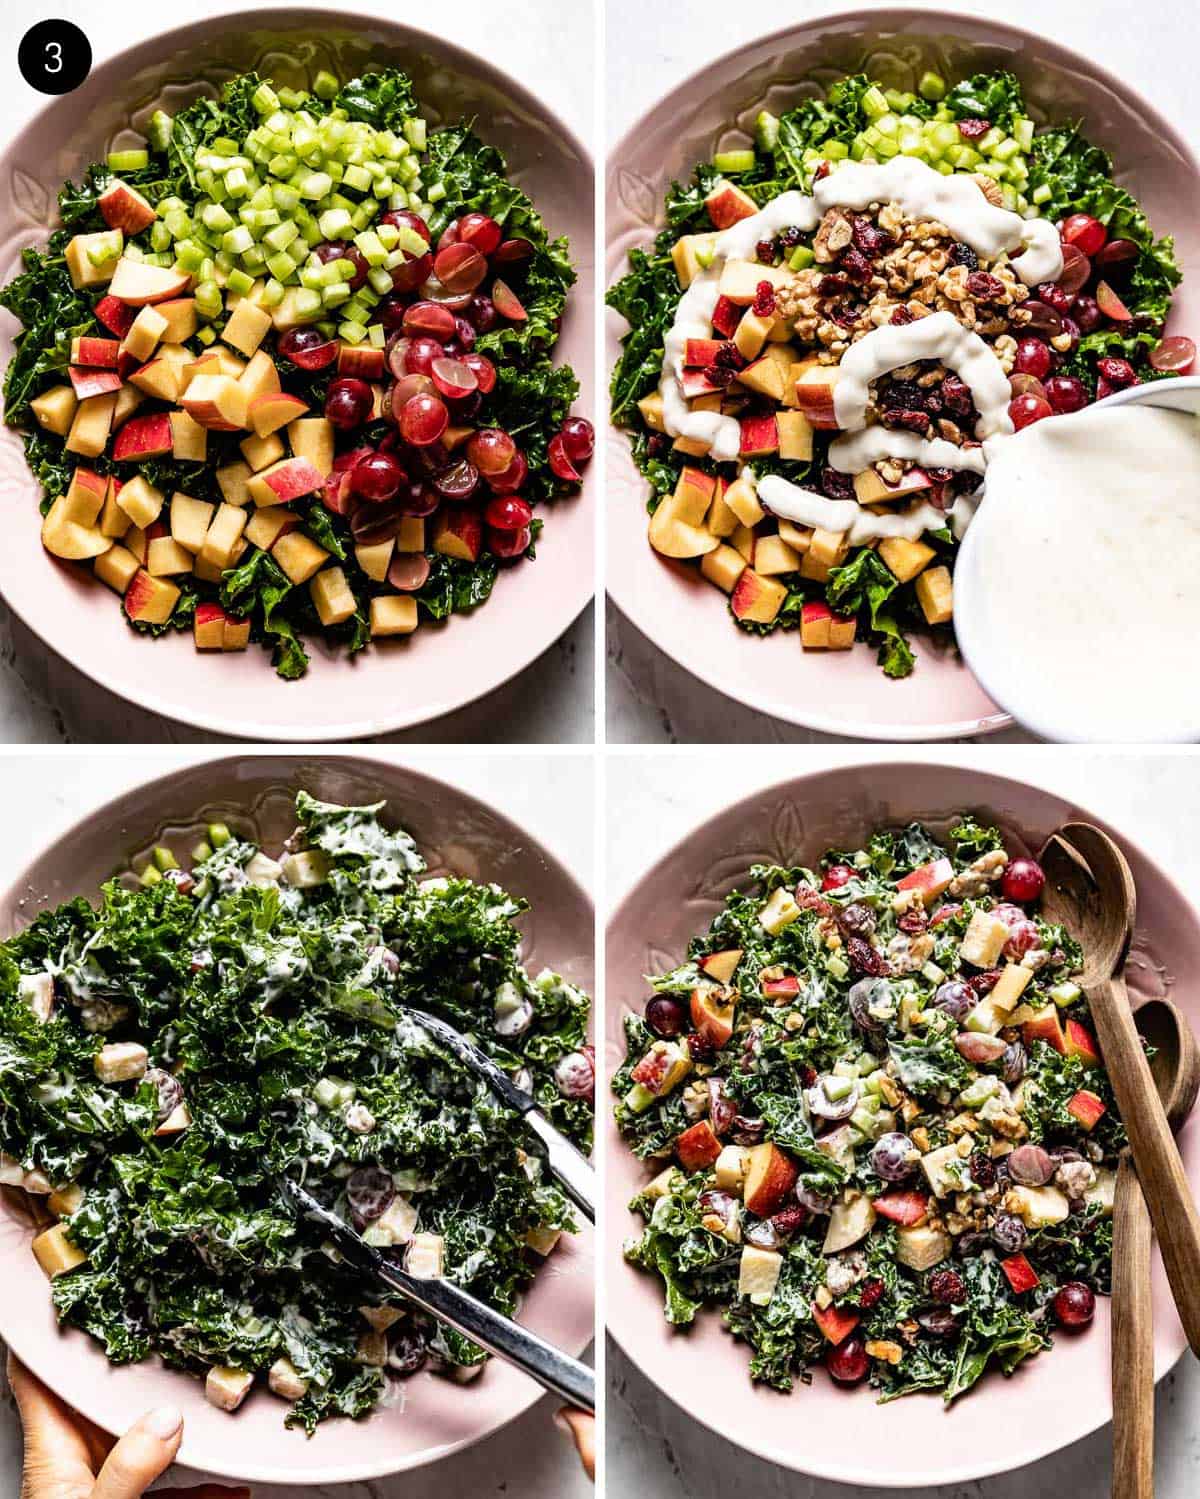 A collage of images showing how to make a kale salad from the top view.